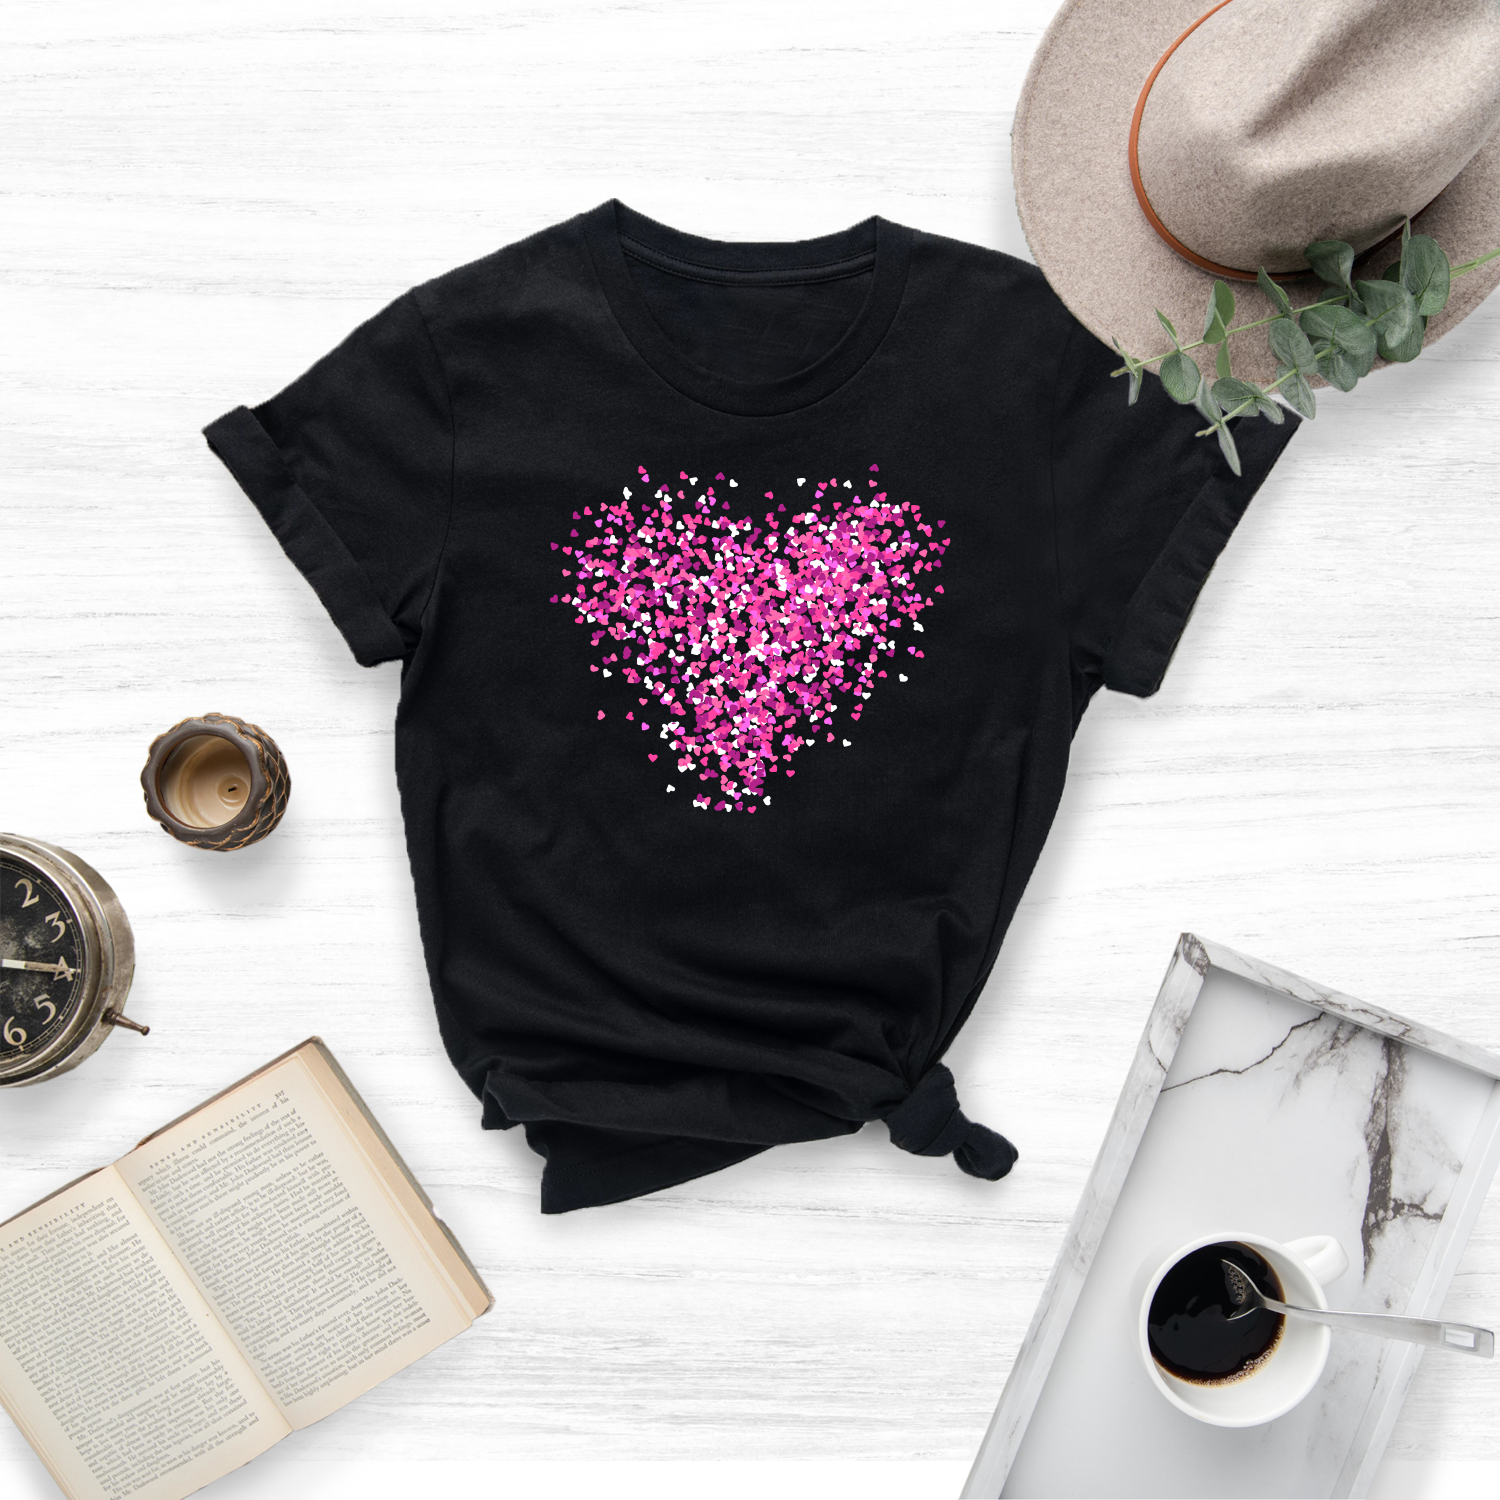 Express your love in a unique and stylish way with this vibrant 3D hearts Valentine's Day tee